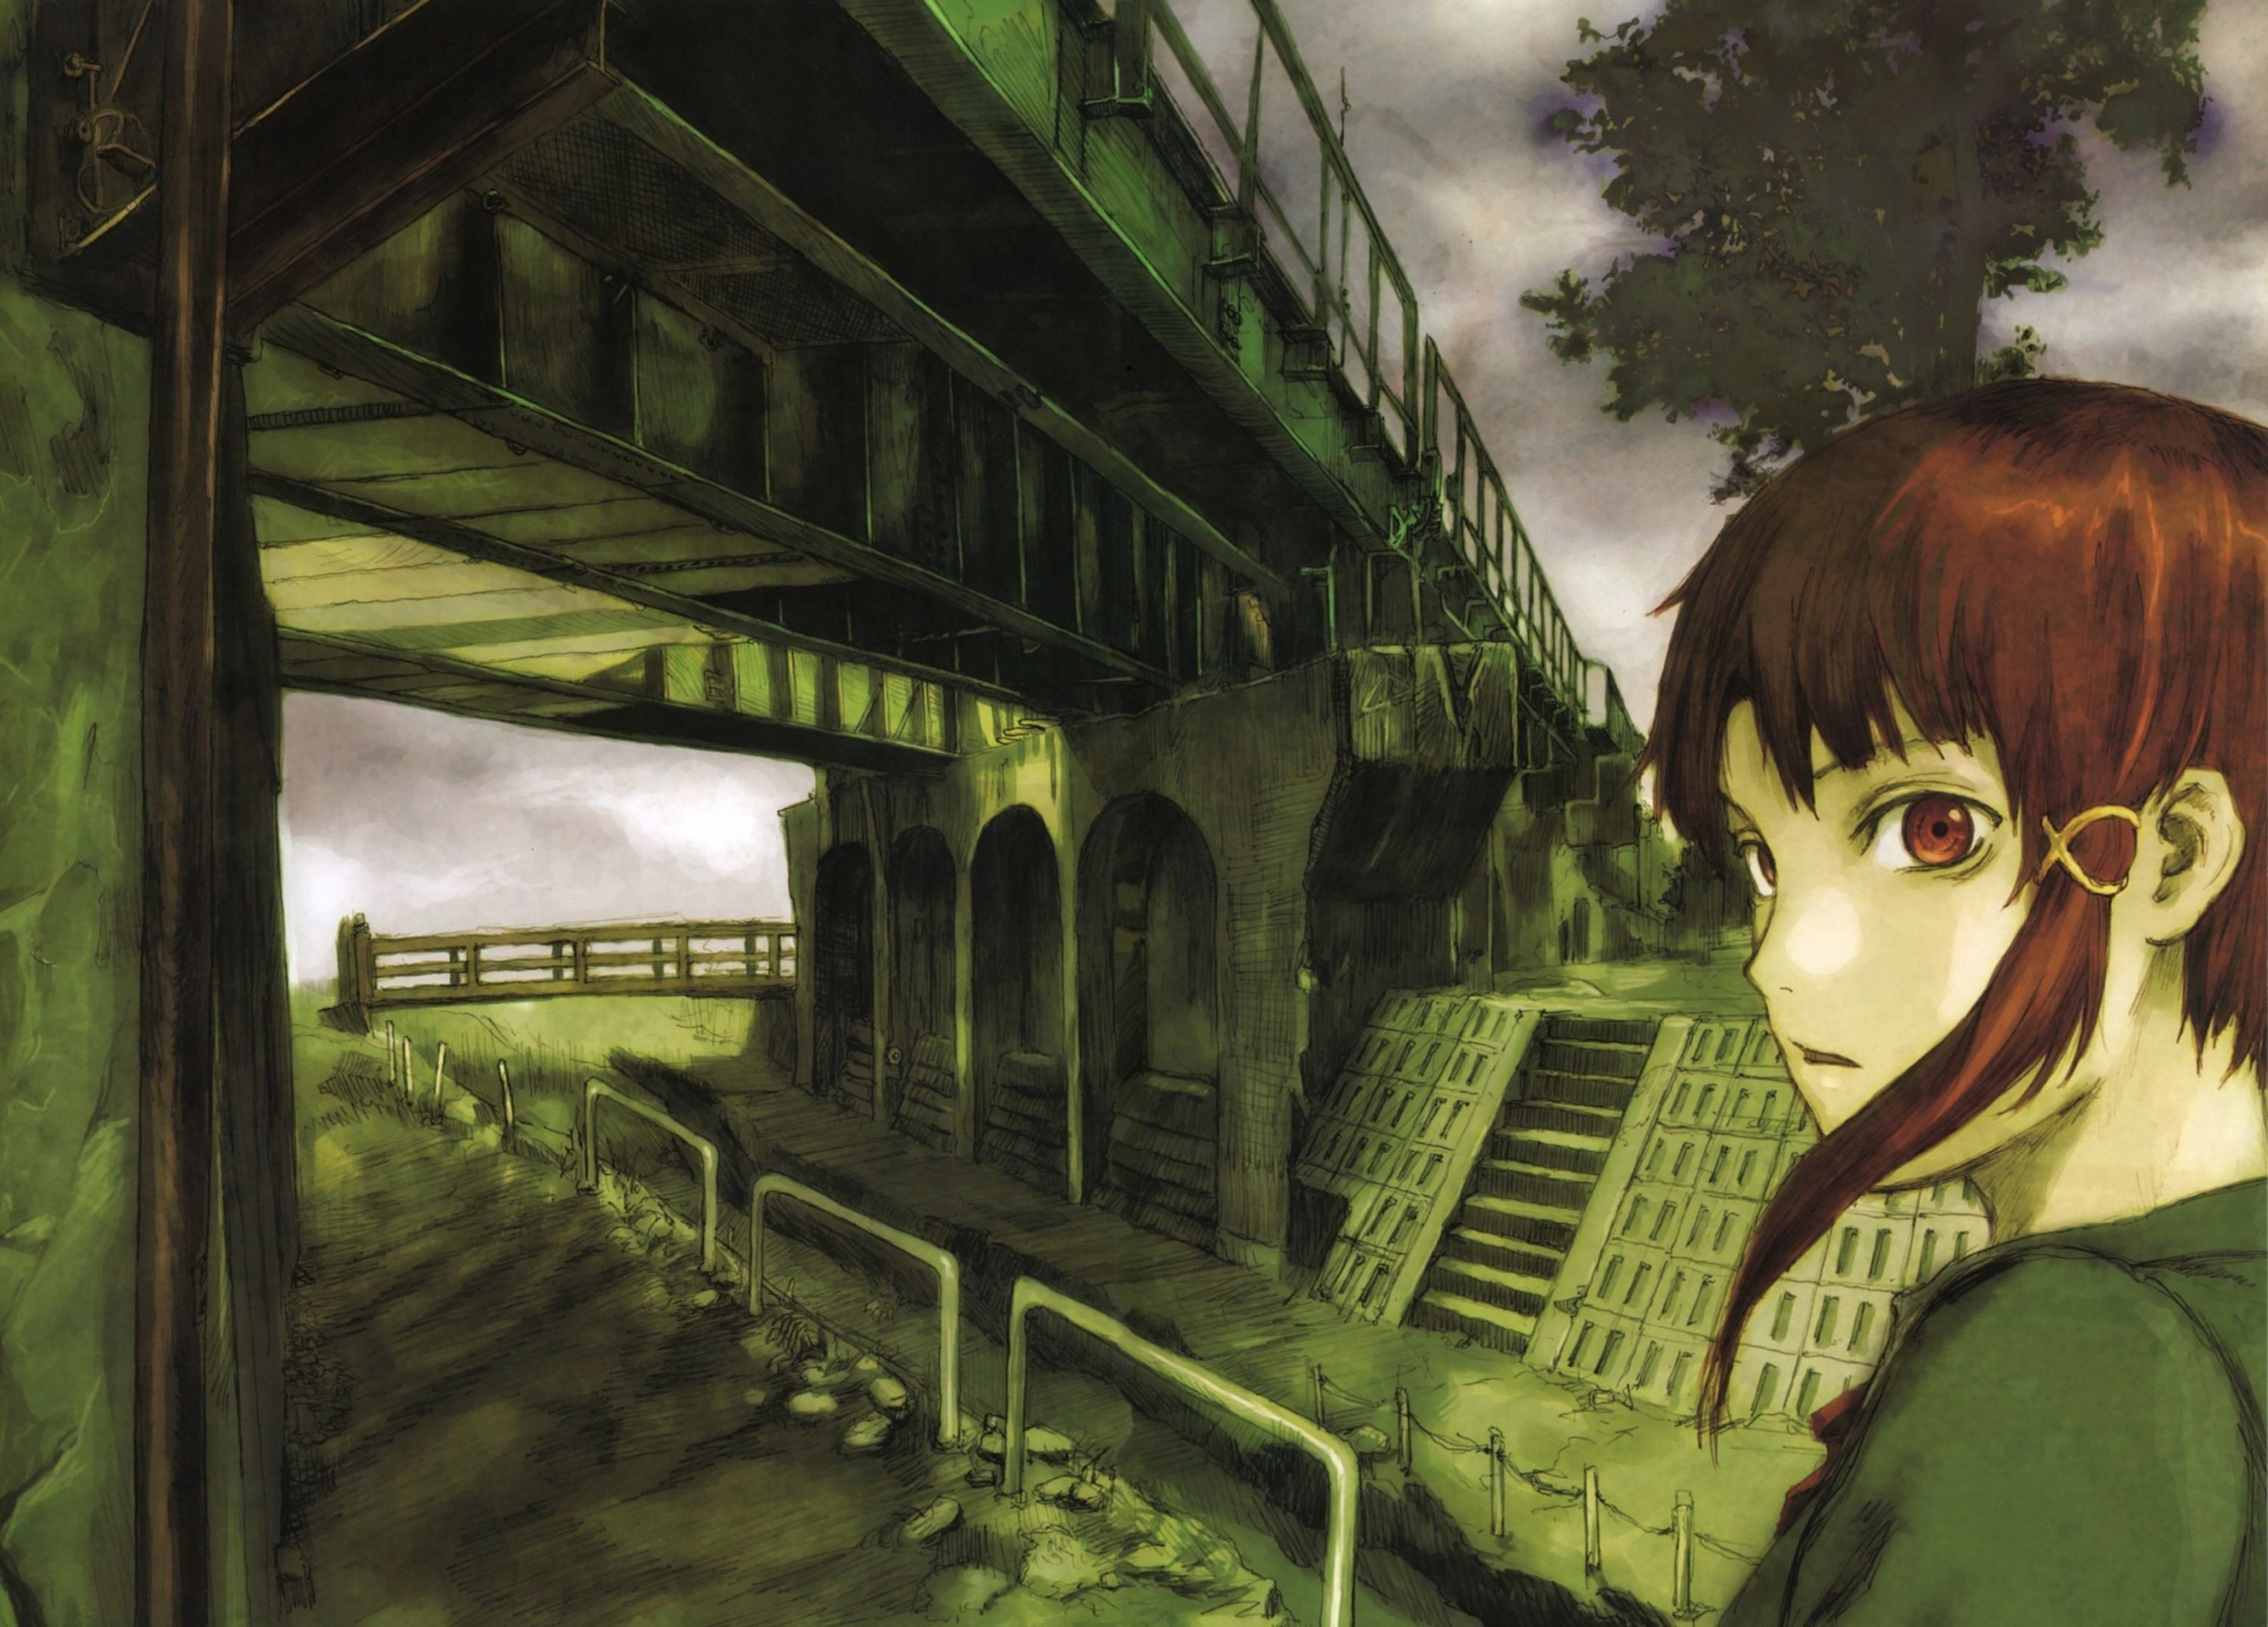 serial experiments lain subbed